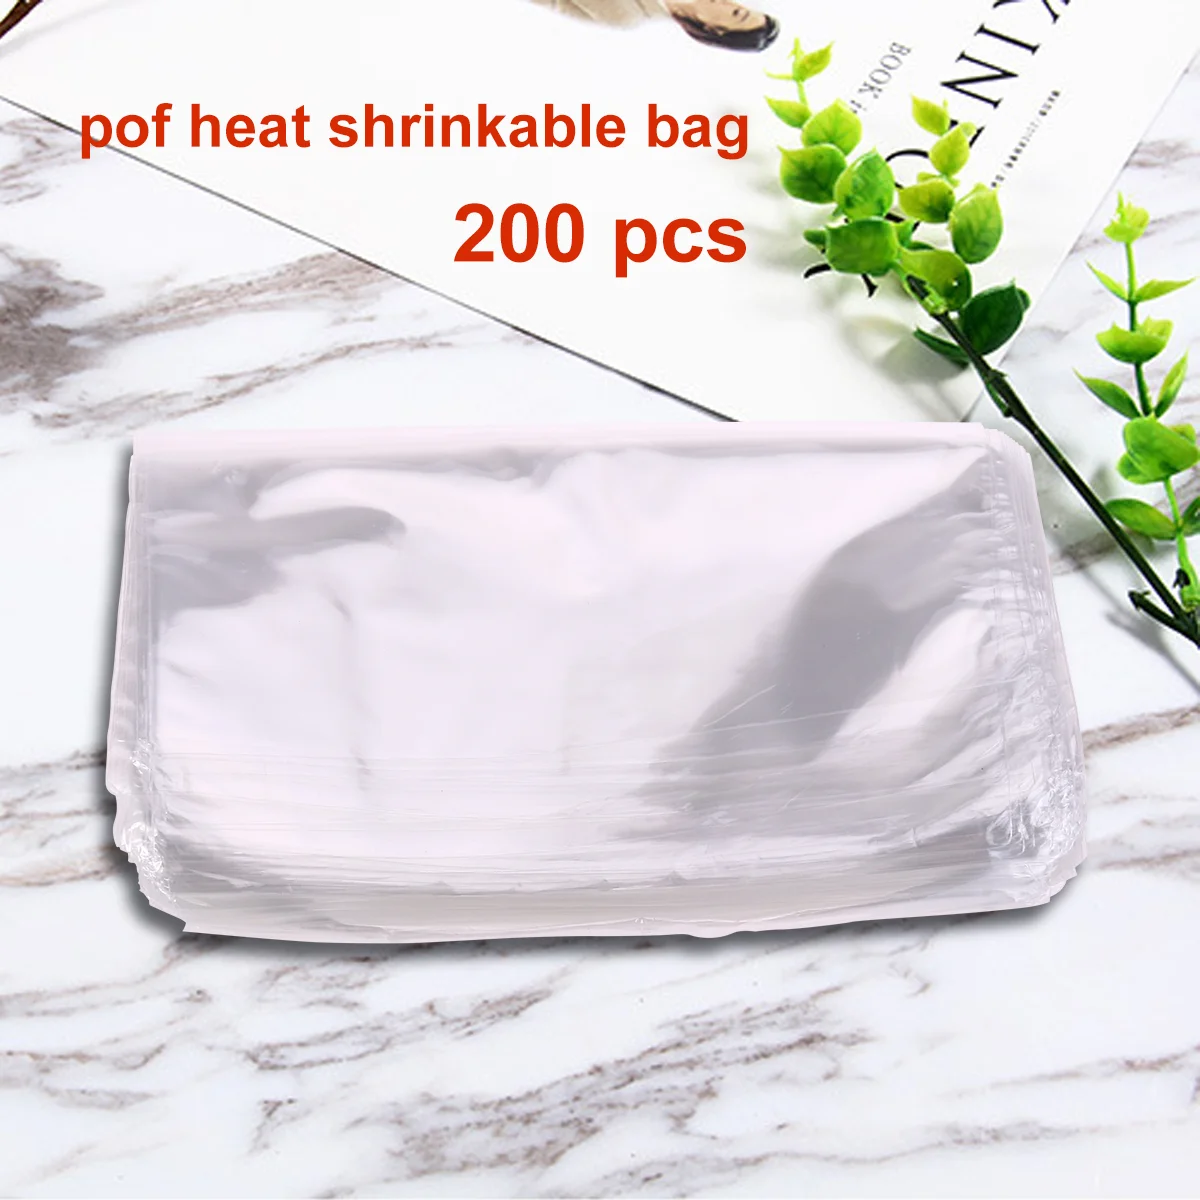 

Shrink Wrap Heat Bath Soap Bombs Film Bomb Packagaing Pvc Shoe Gift Packaging Sealer Baskets Pouch Plastic Cellophane Roll